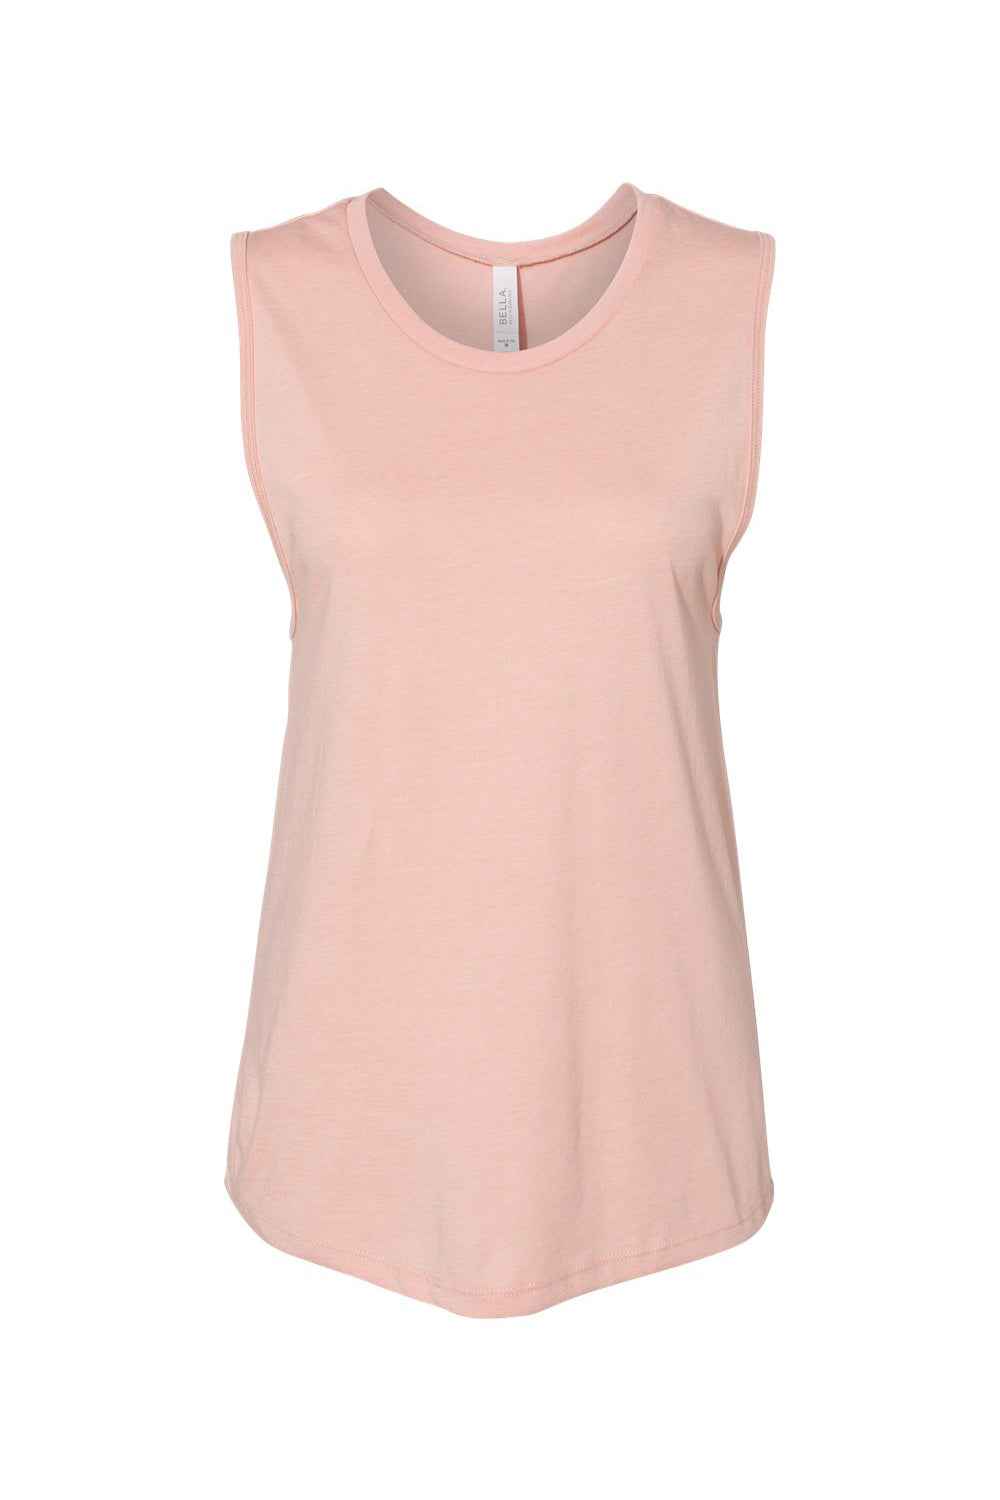 Bella + Canvas BC6003/B6003/6003 Womens Jersey Muscle Tank Top Heather Peach Flat Front